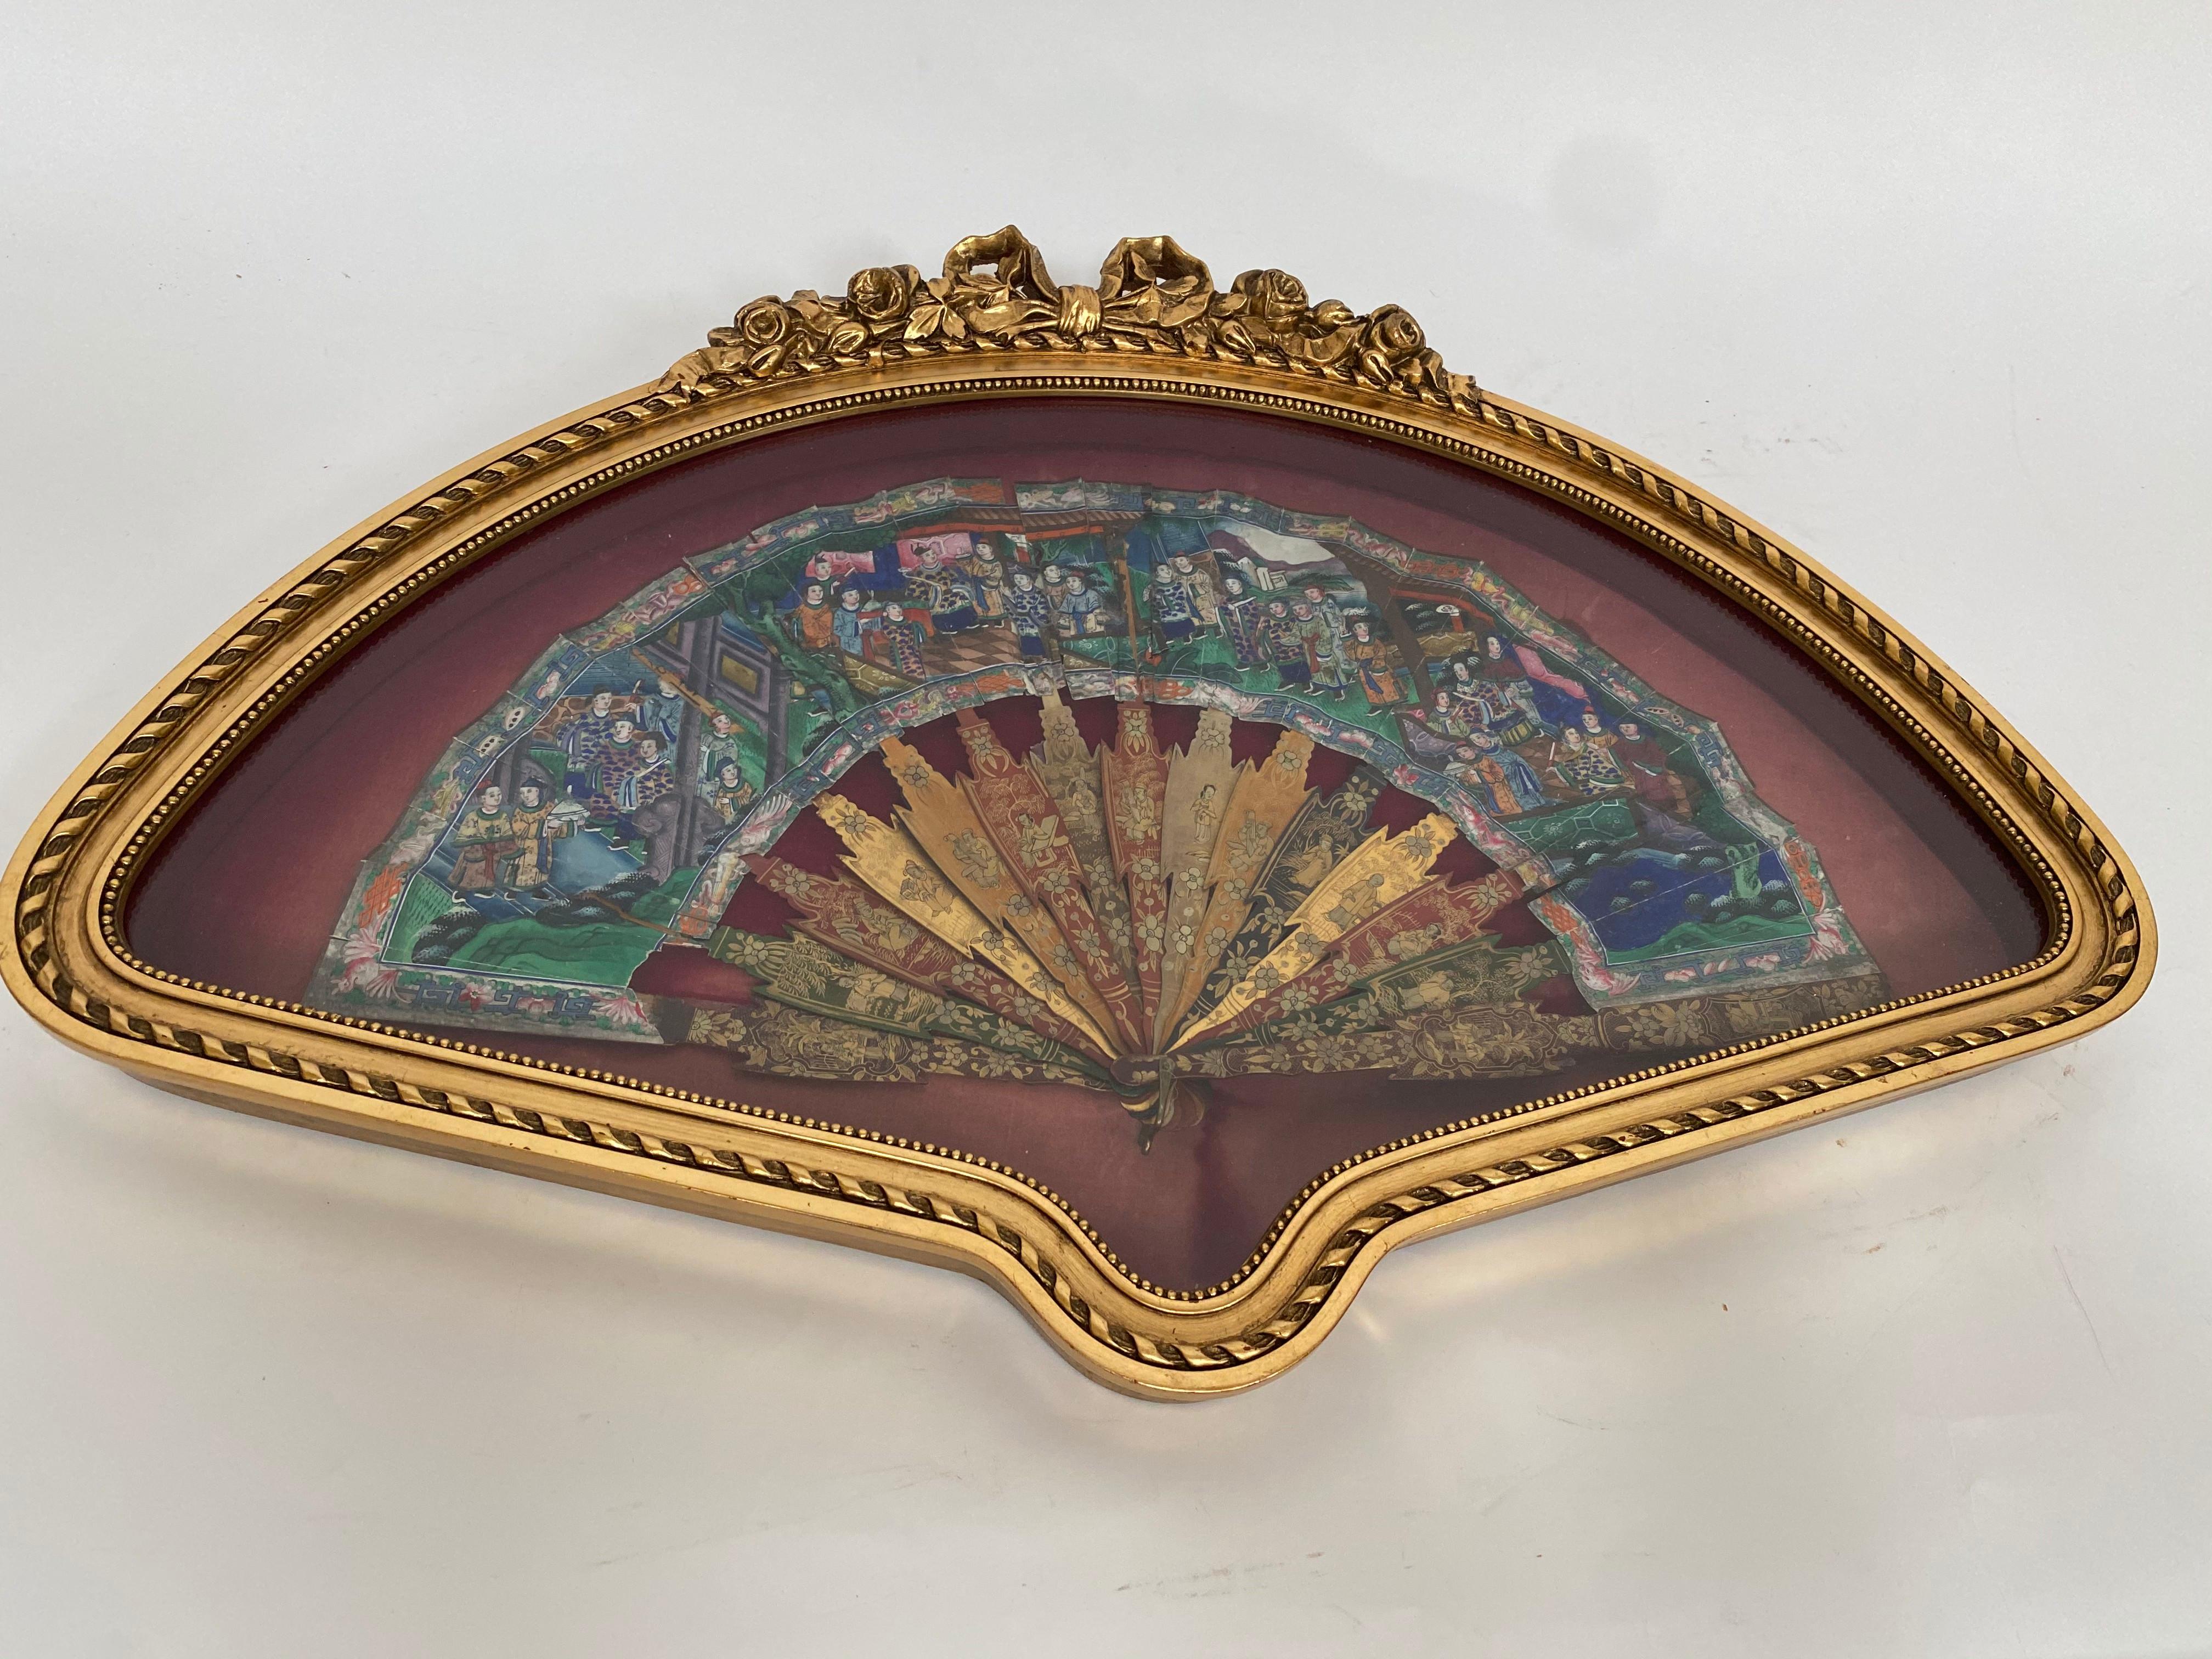 Antique 19th century hand painted Chinese fan with mother of pearl faces, Qing dynasty, the fan features black and gold lacquered handled a colorful screen with a figural, hand painted, scene in shades of blue, green, purple and brown and red. With